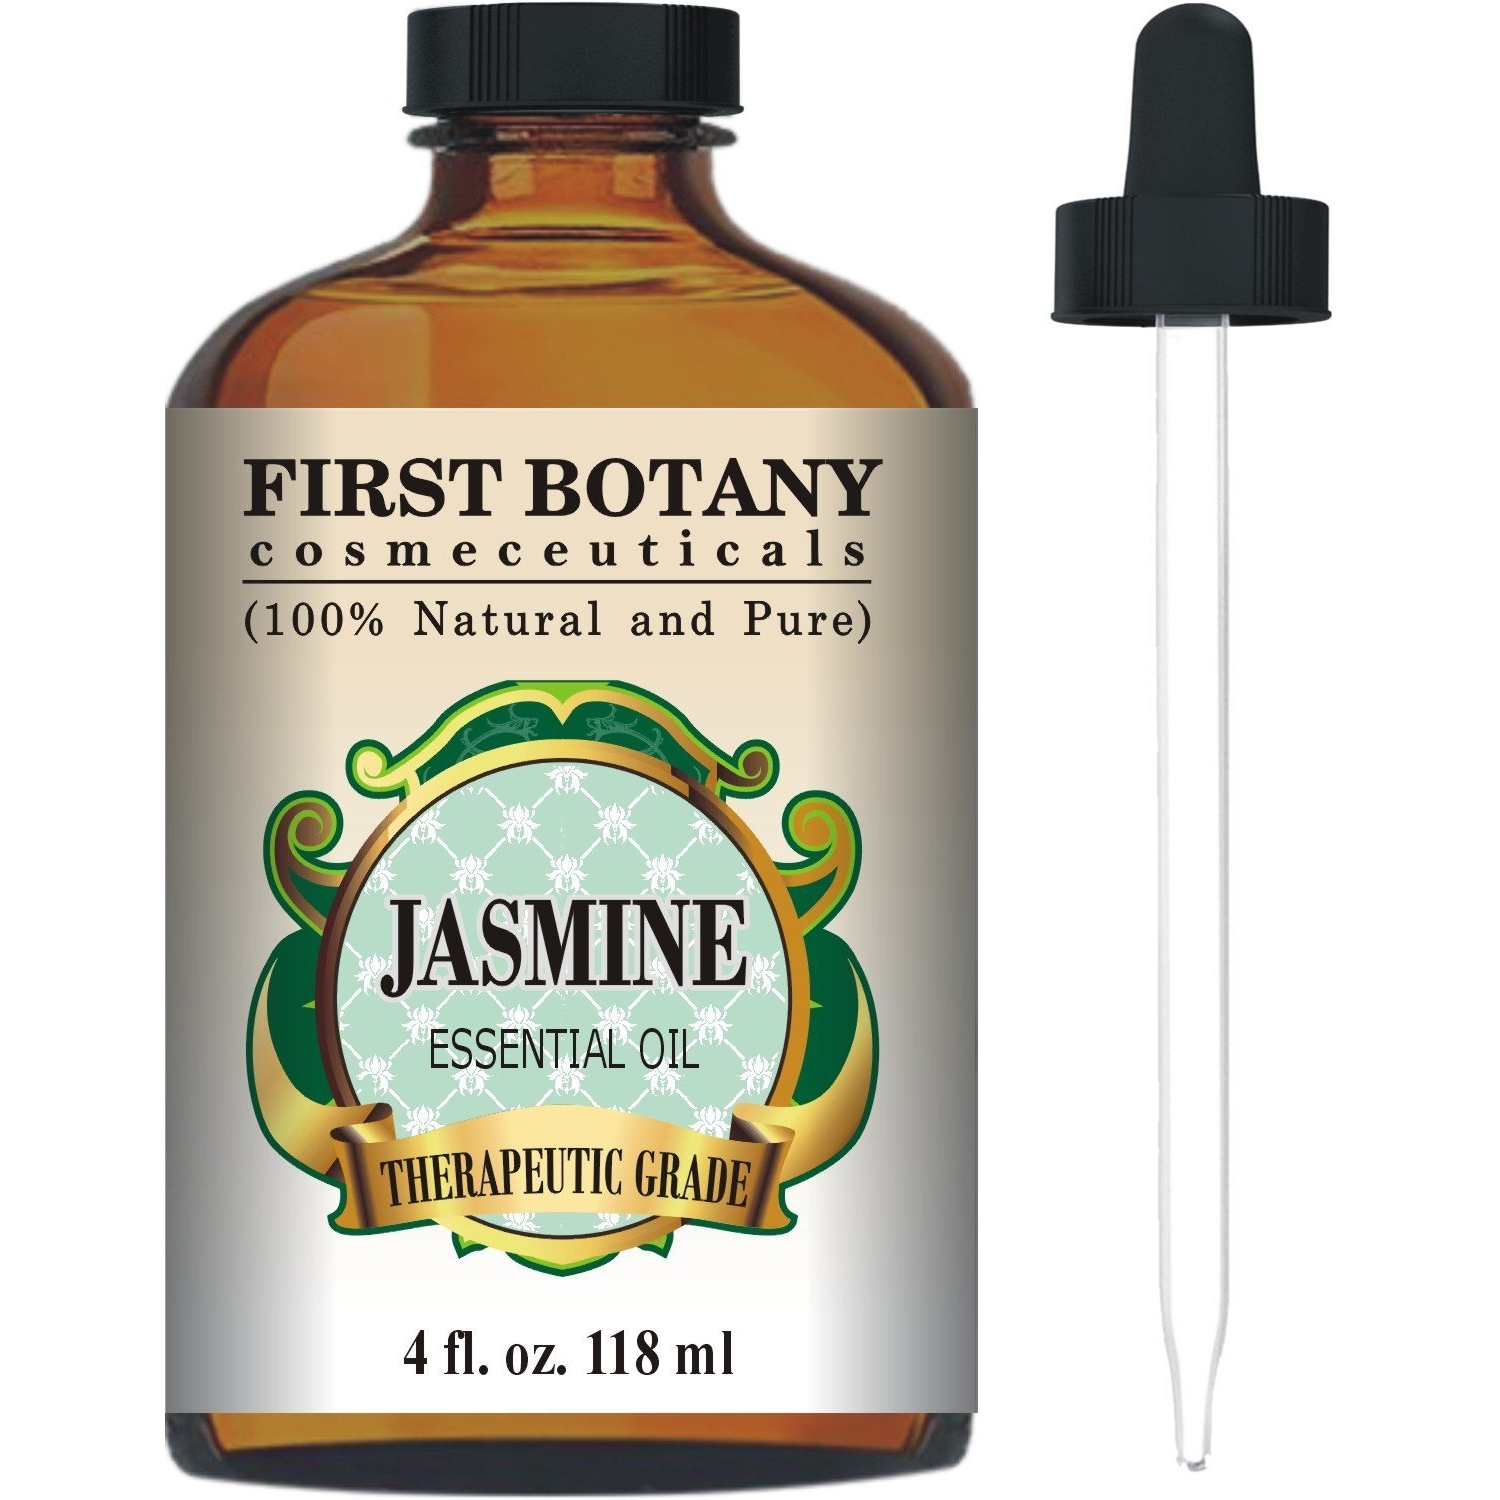 Jasmine Essential Oil 4 fl. oz. With a Glass Dropper - 100% Pure and Natural with Premium Quality & Therapeutic Grade - Ideal for Aromatherapy & Maintaining Healthy Skin